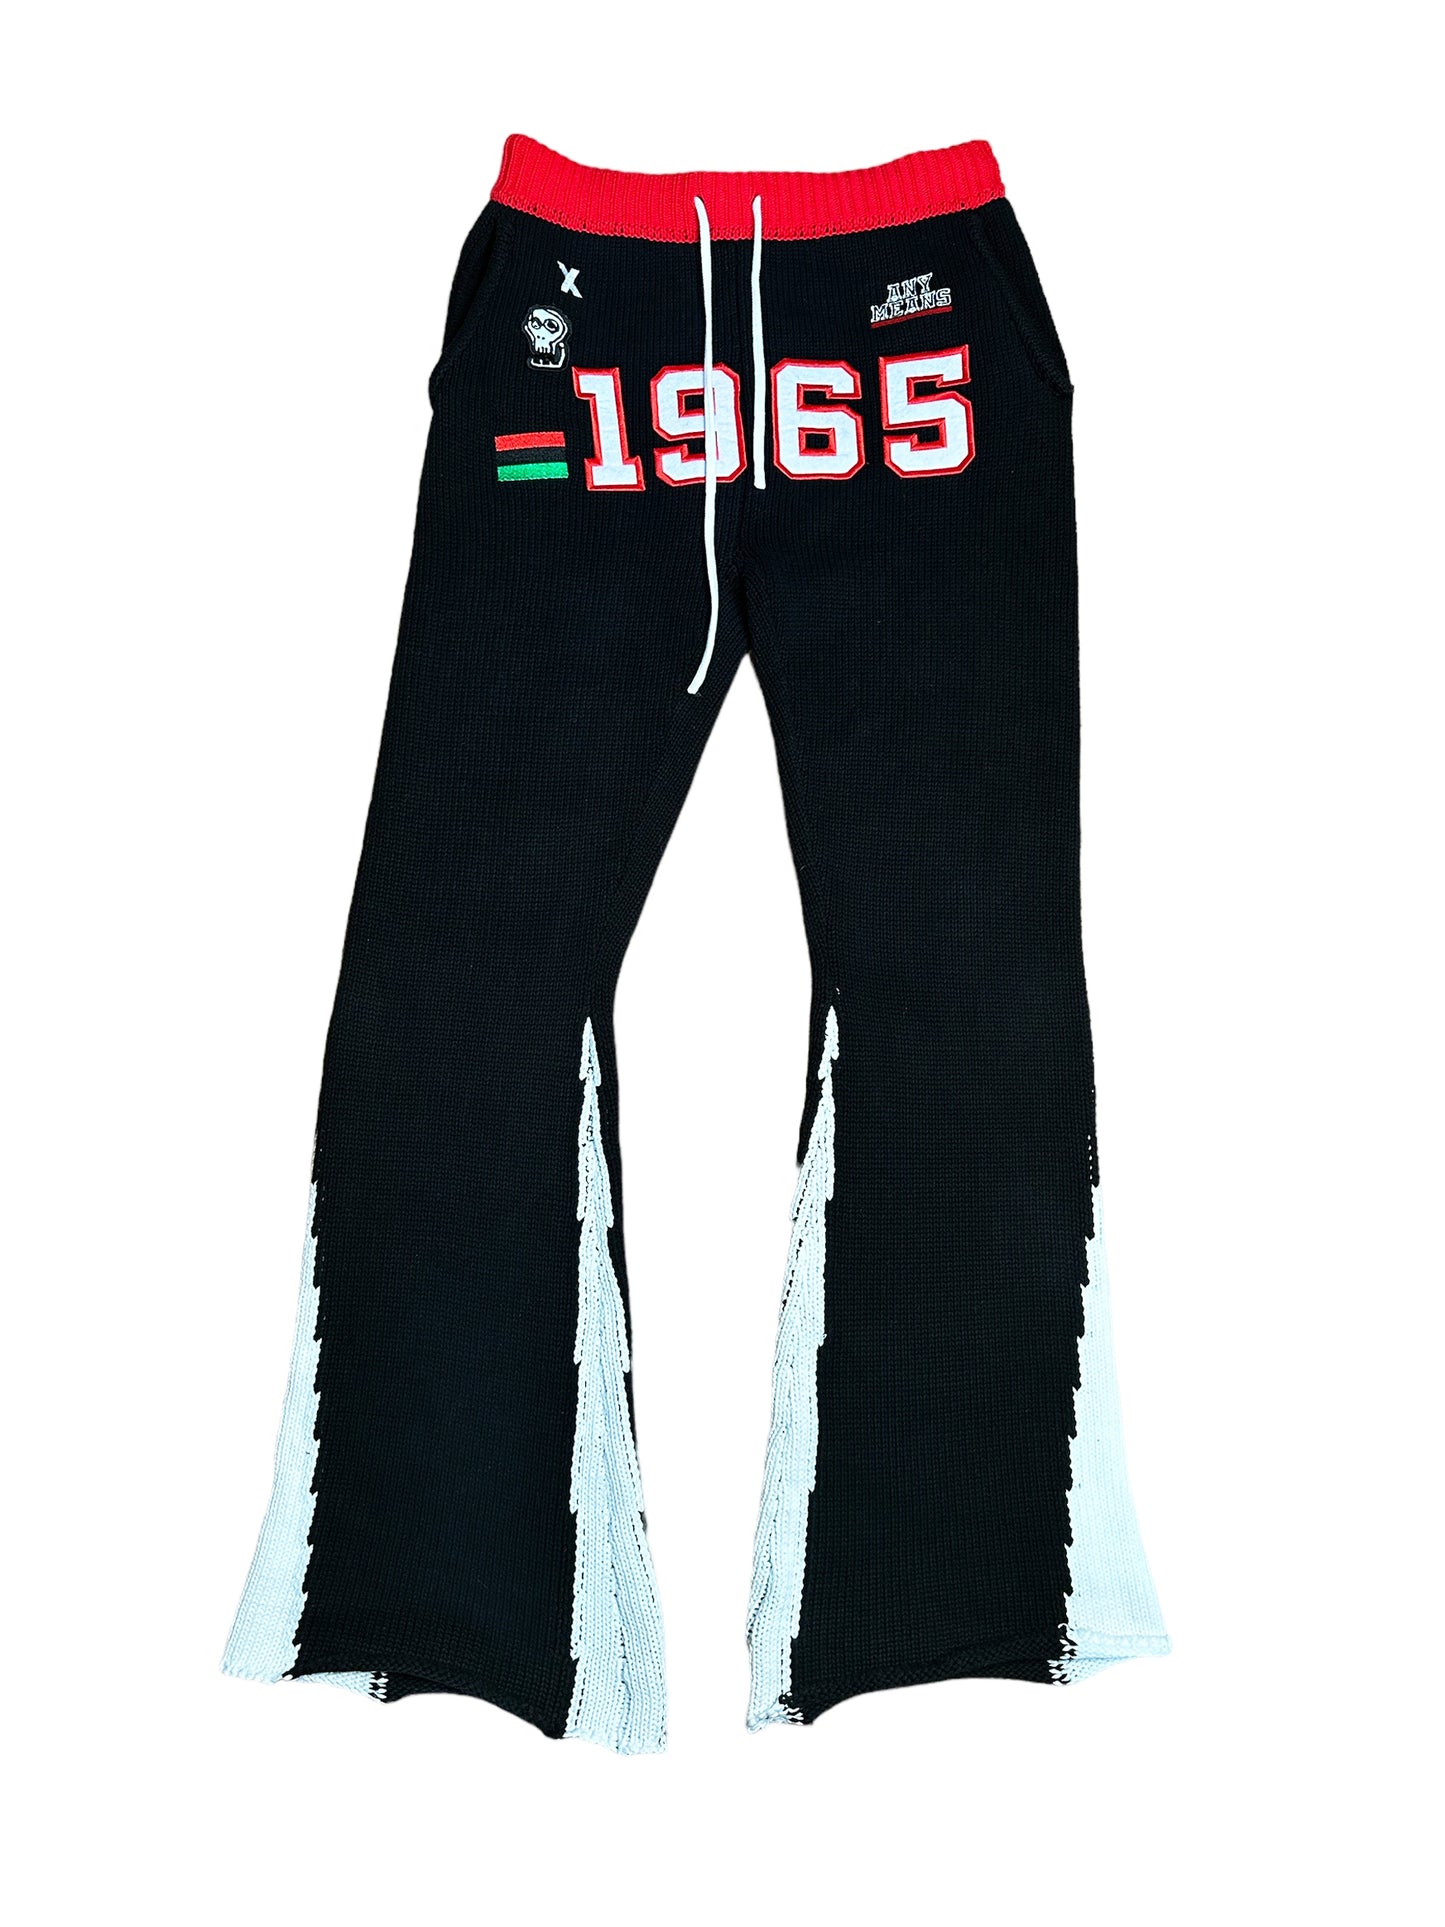 ANY MEANS Malcolm X 1965 Varsity Knitted Set